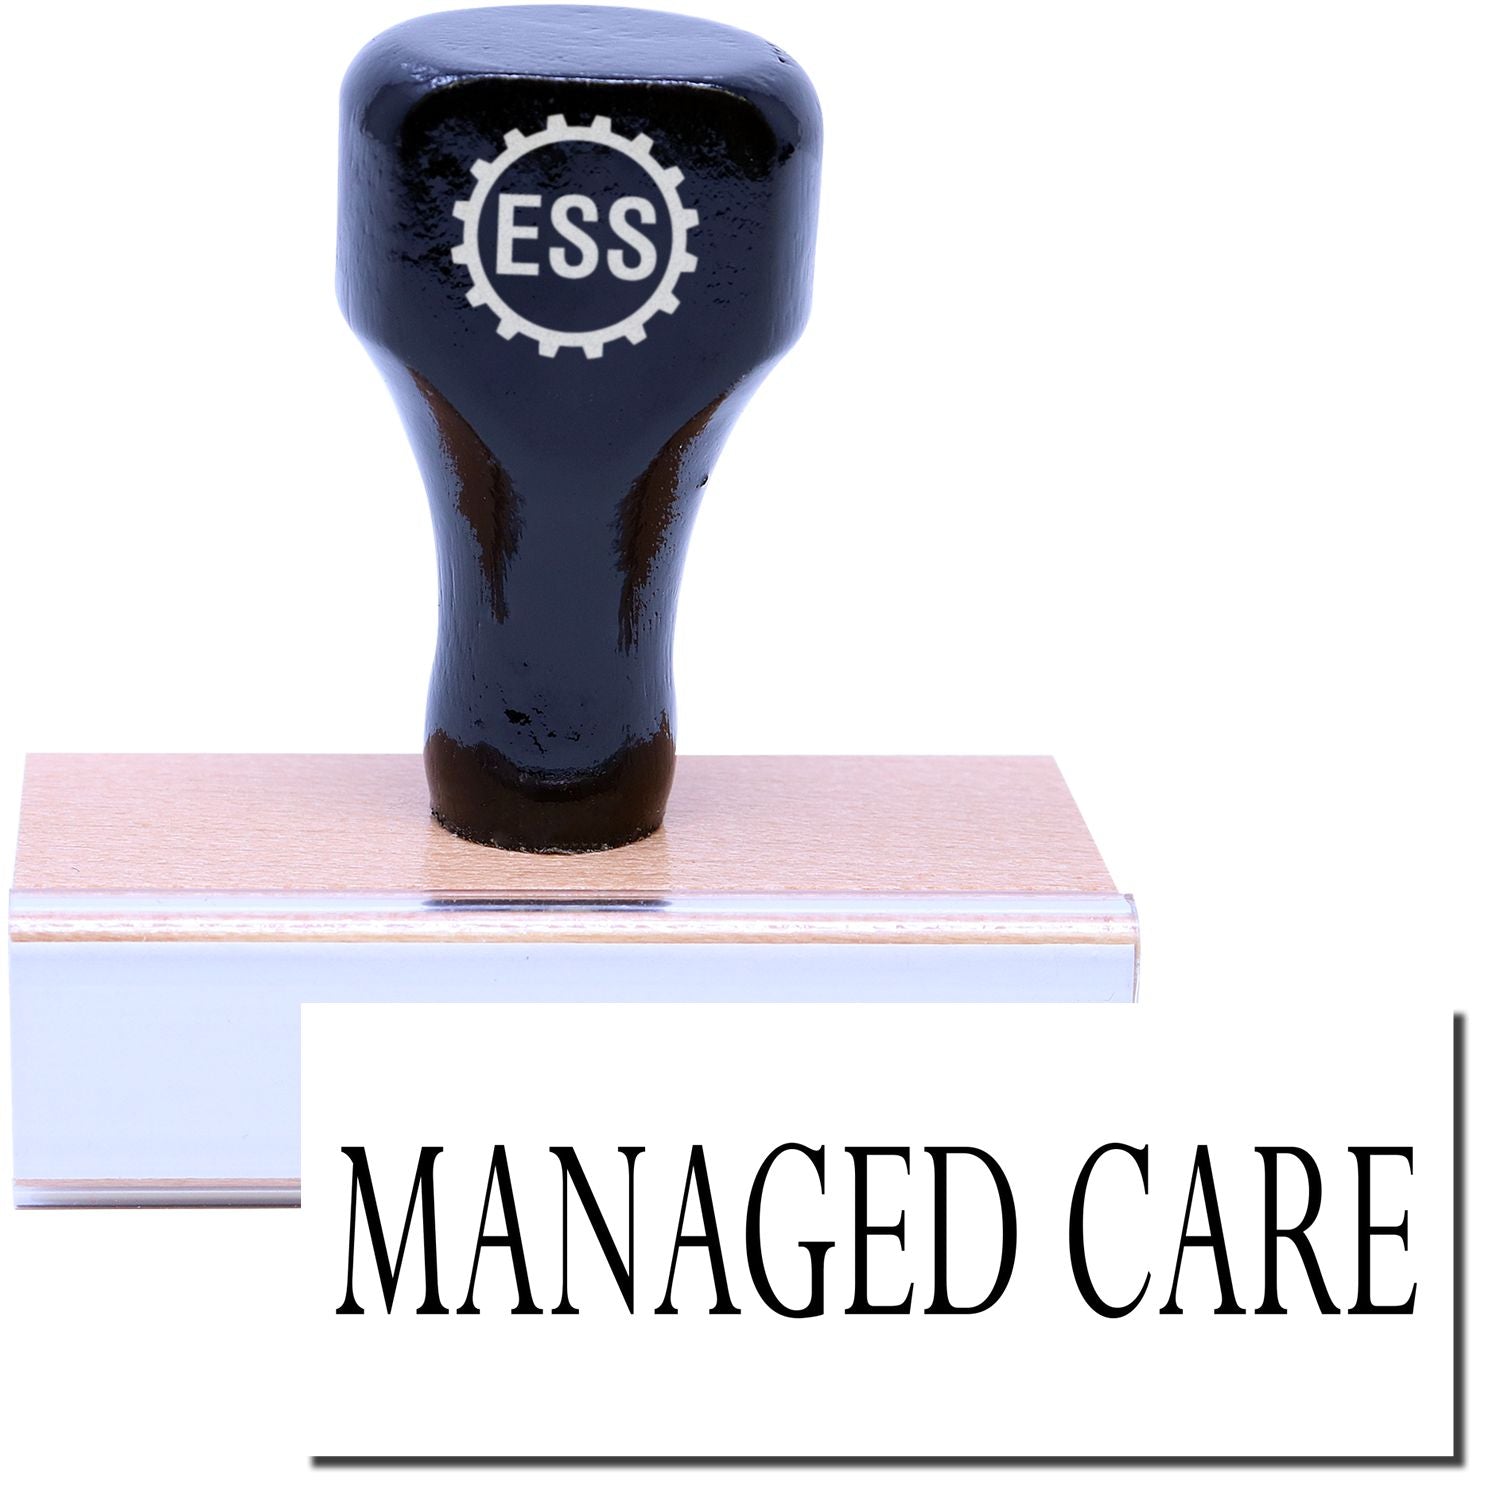 A stock office rubber stamp with a stamped image showing how the text "MANAGED CARE" is displayed after stamping.